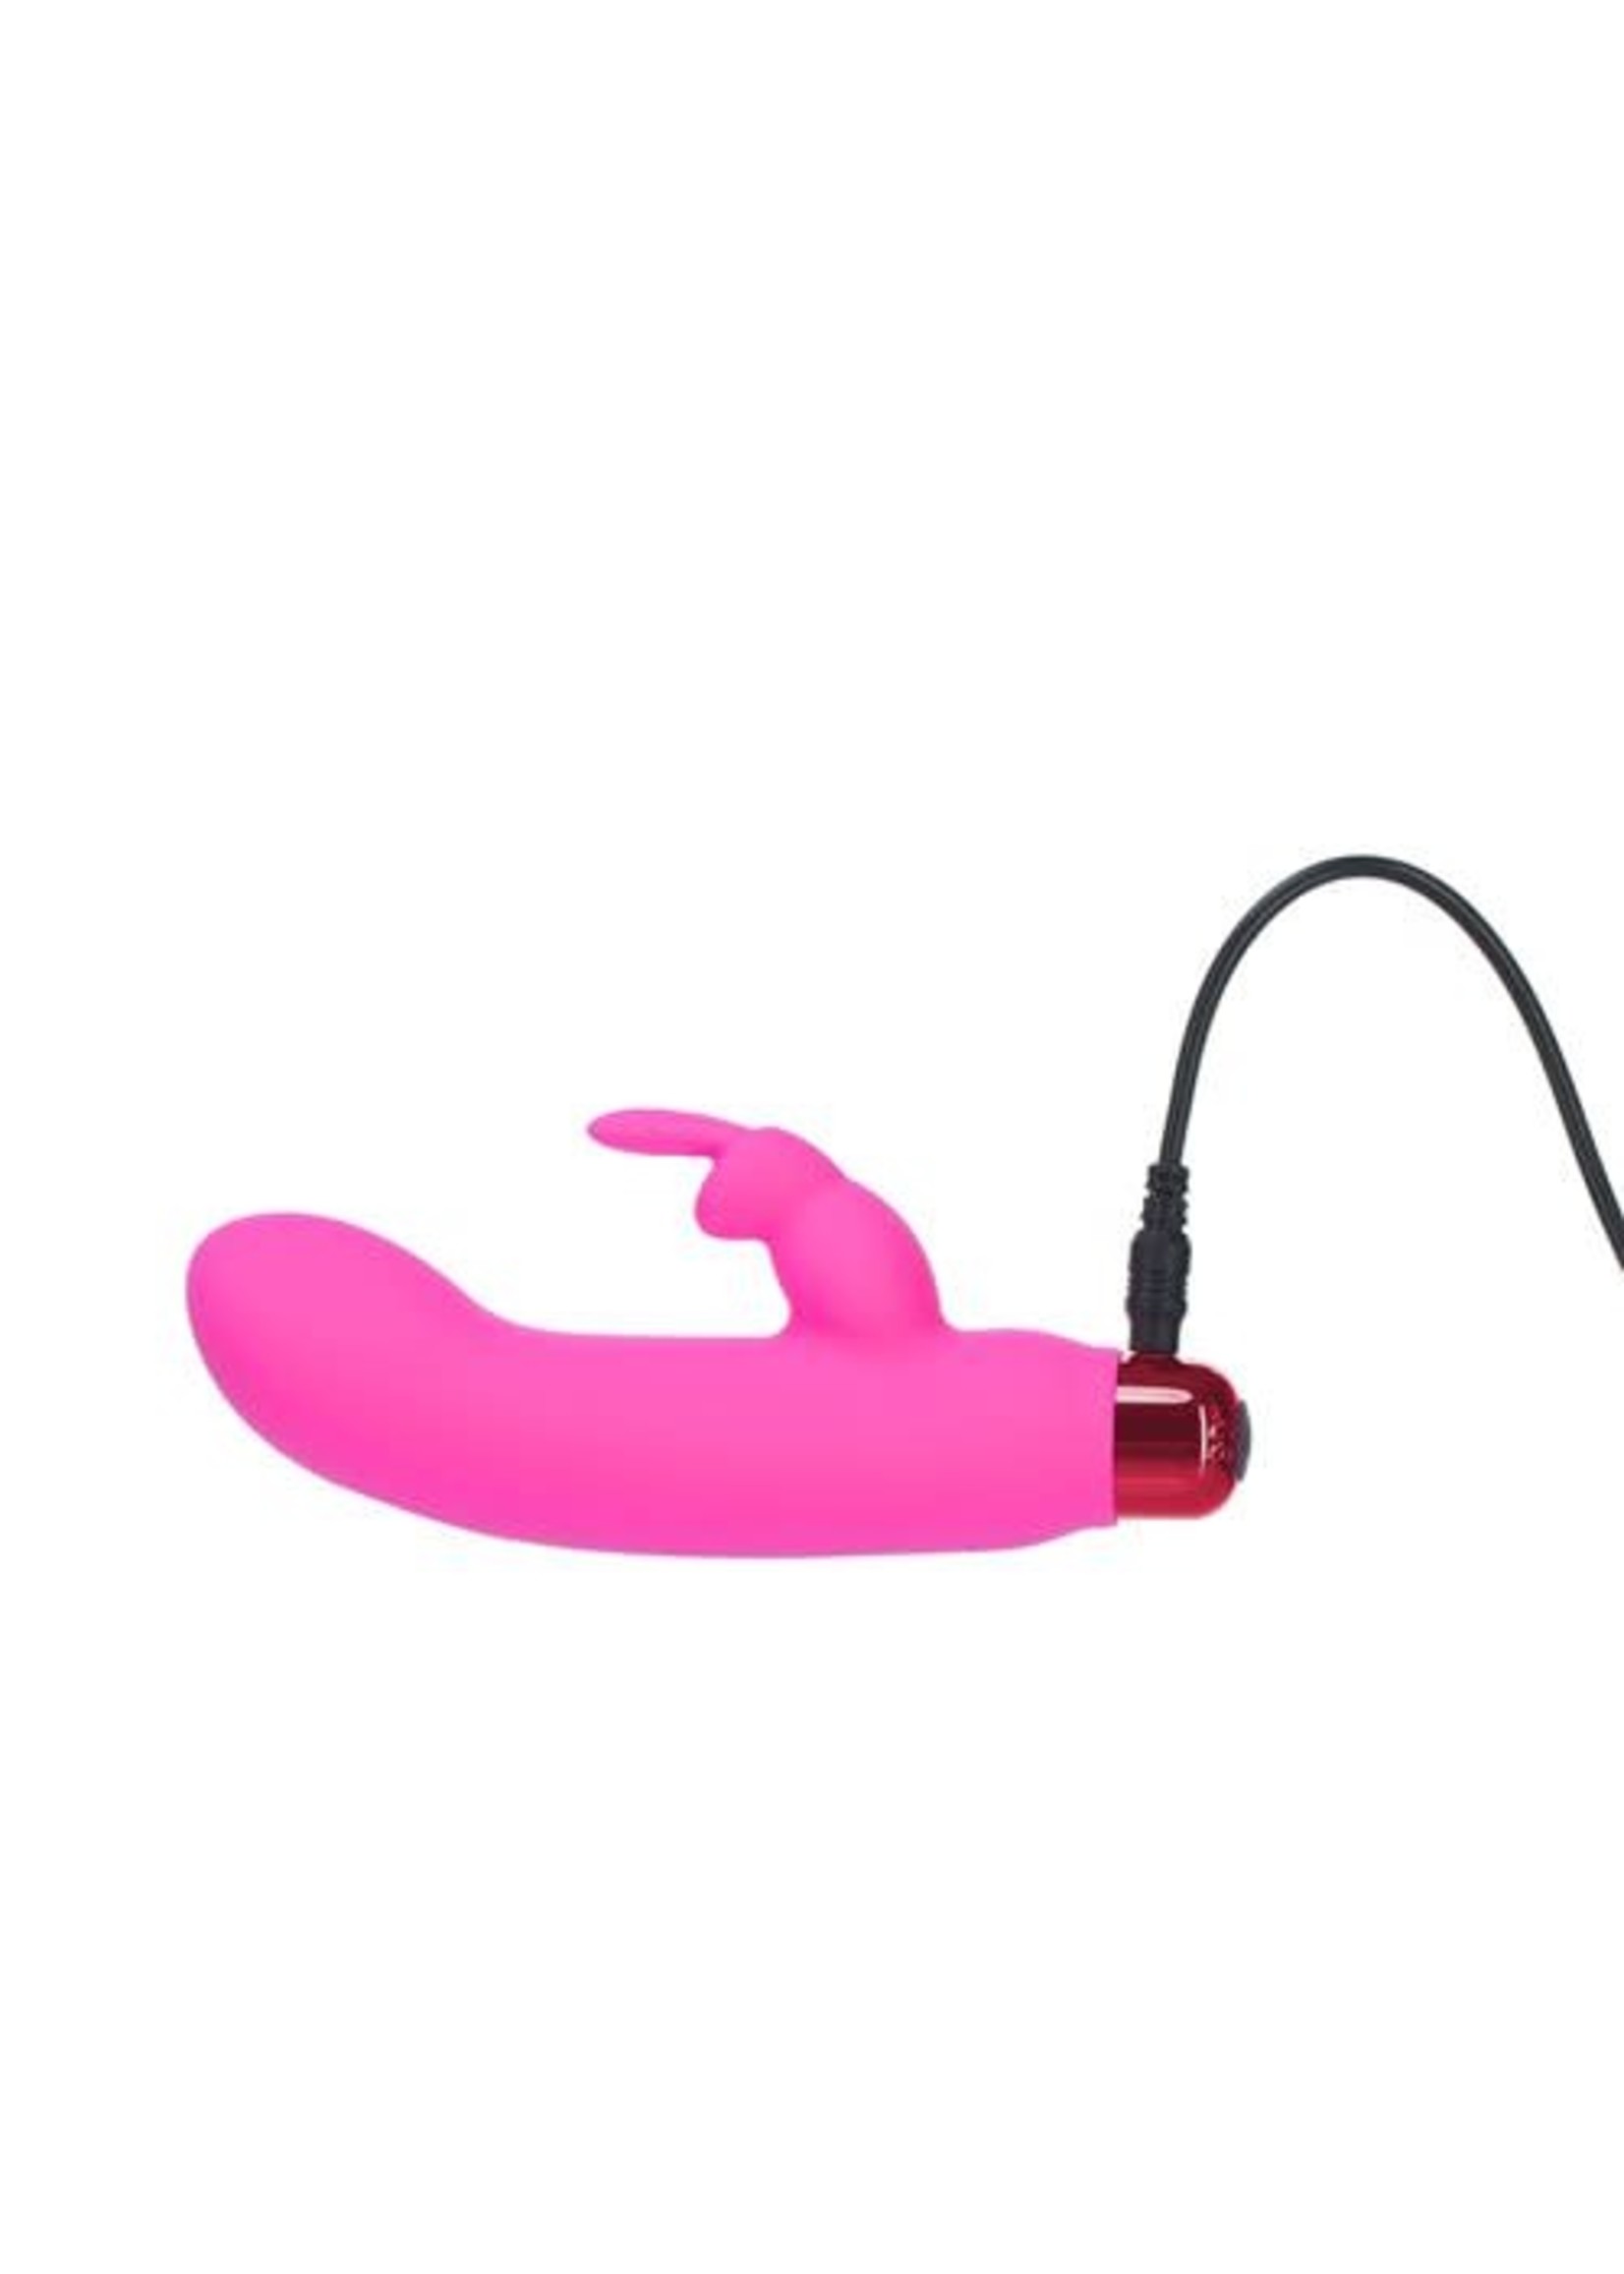 ALICE'S BUNNY - RECHARGEABLE BULLET WITH REMOVABLE RABBIT SLEEVE - PINK